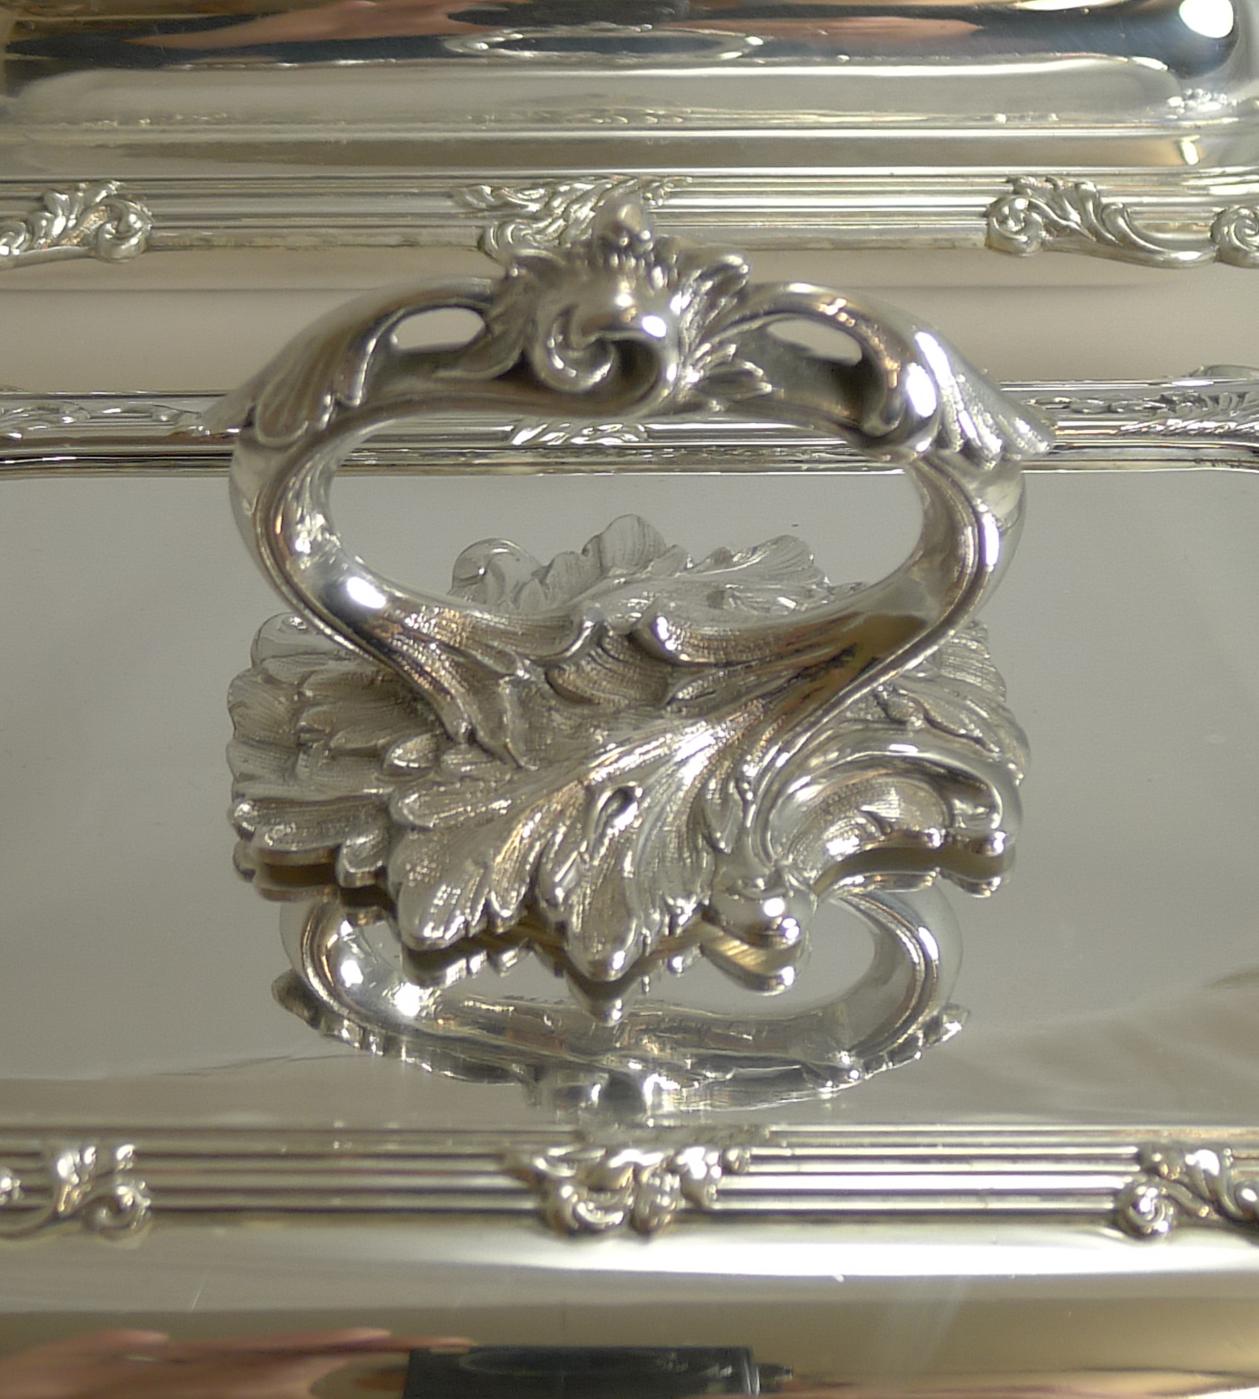 Late 19th Century Pair of Antique English Silver Plated Entree Dishes by James Dixon & Sons